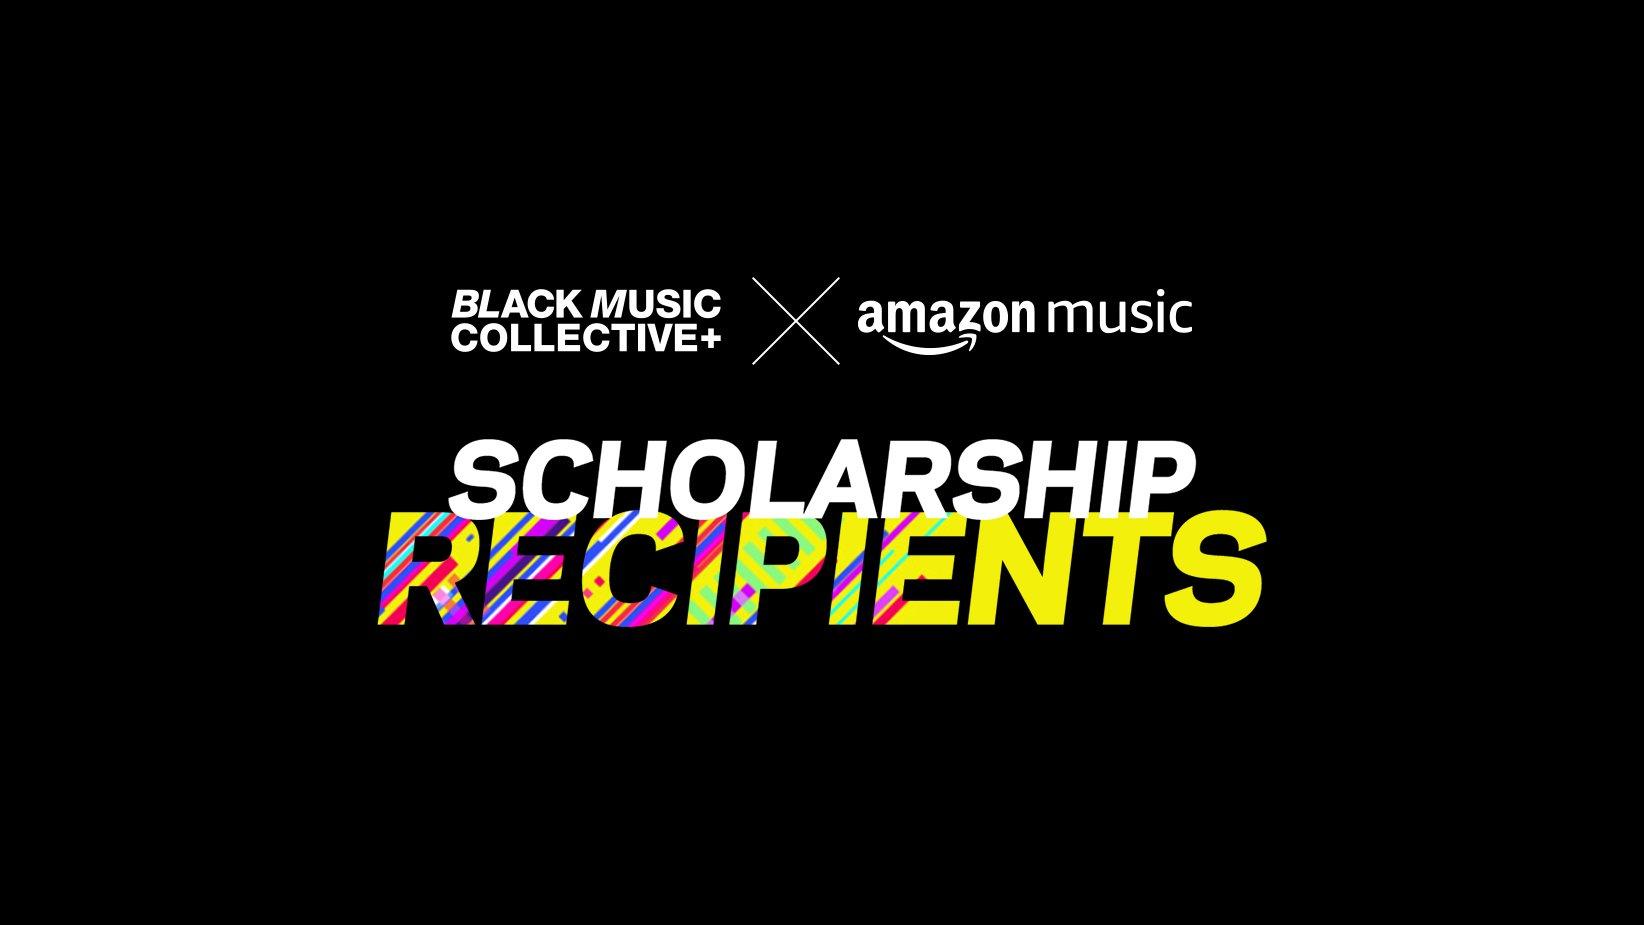 Artwork for The Recording Academy's Black Music Collective And Amazon Music "Your Future Is Now" Scholarship Program